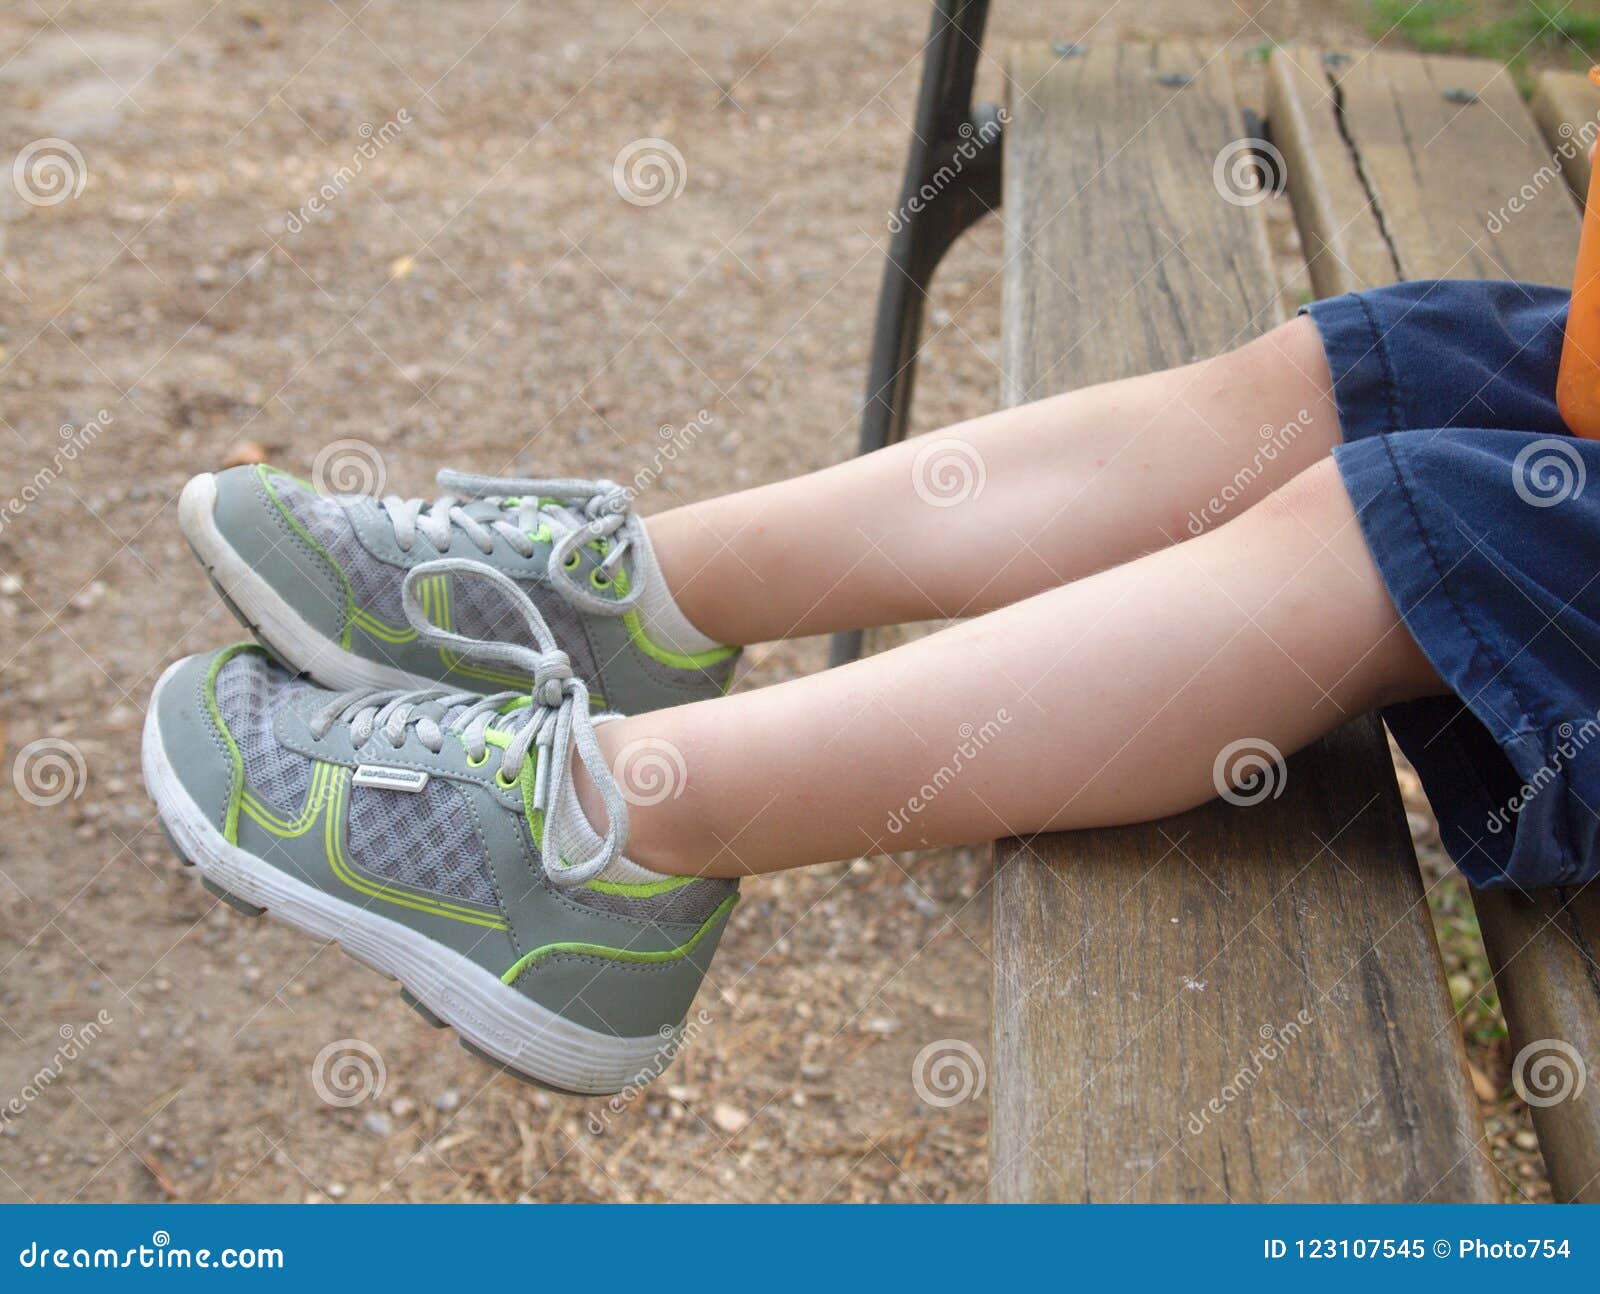 Close Up View of Boy Sitting on a Bench Stock Image - Image of grass ...